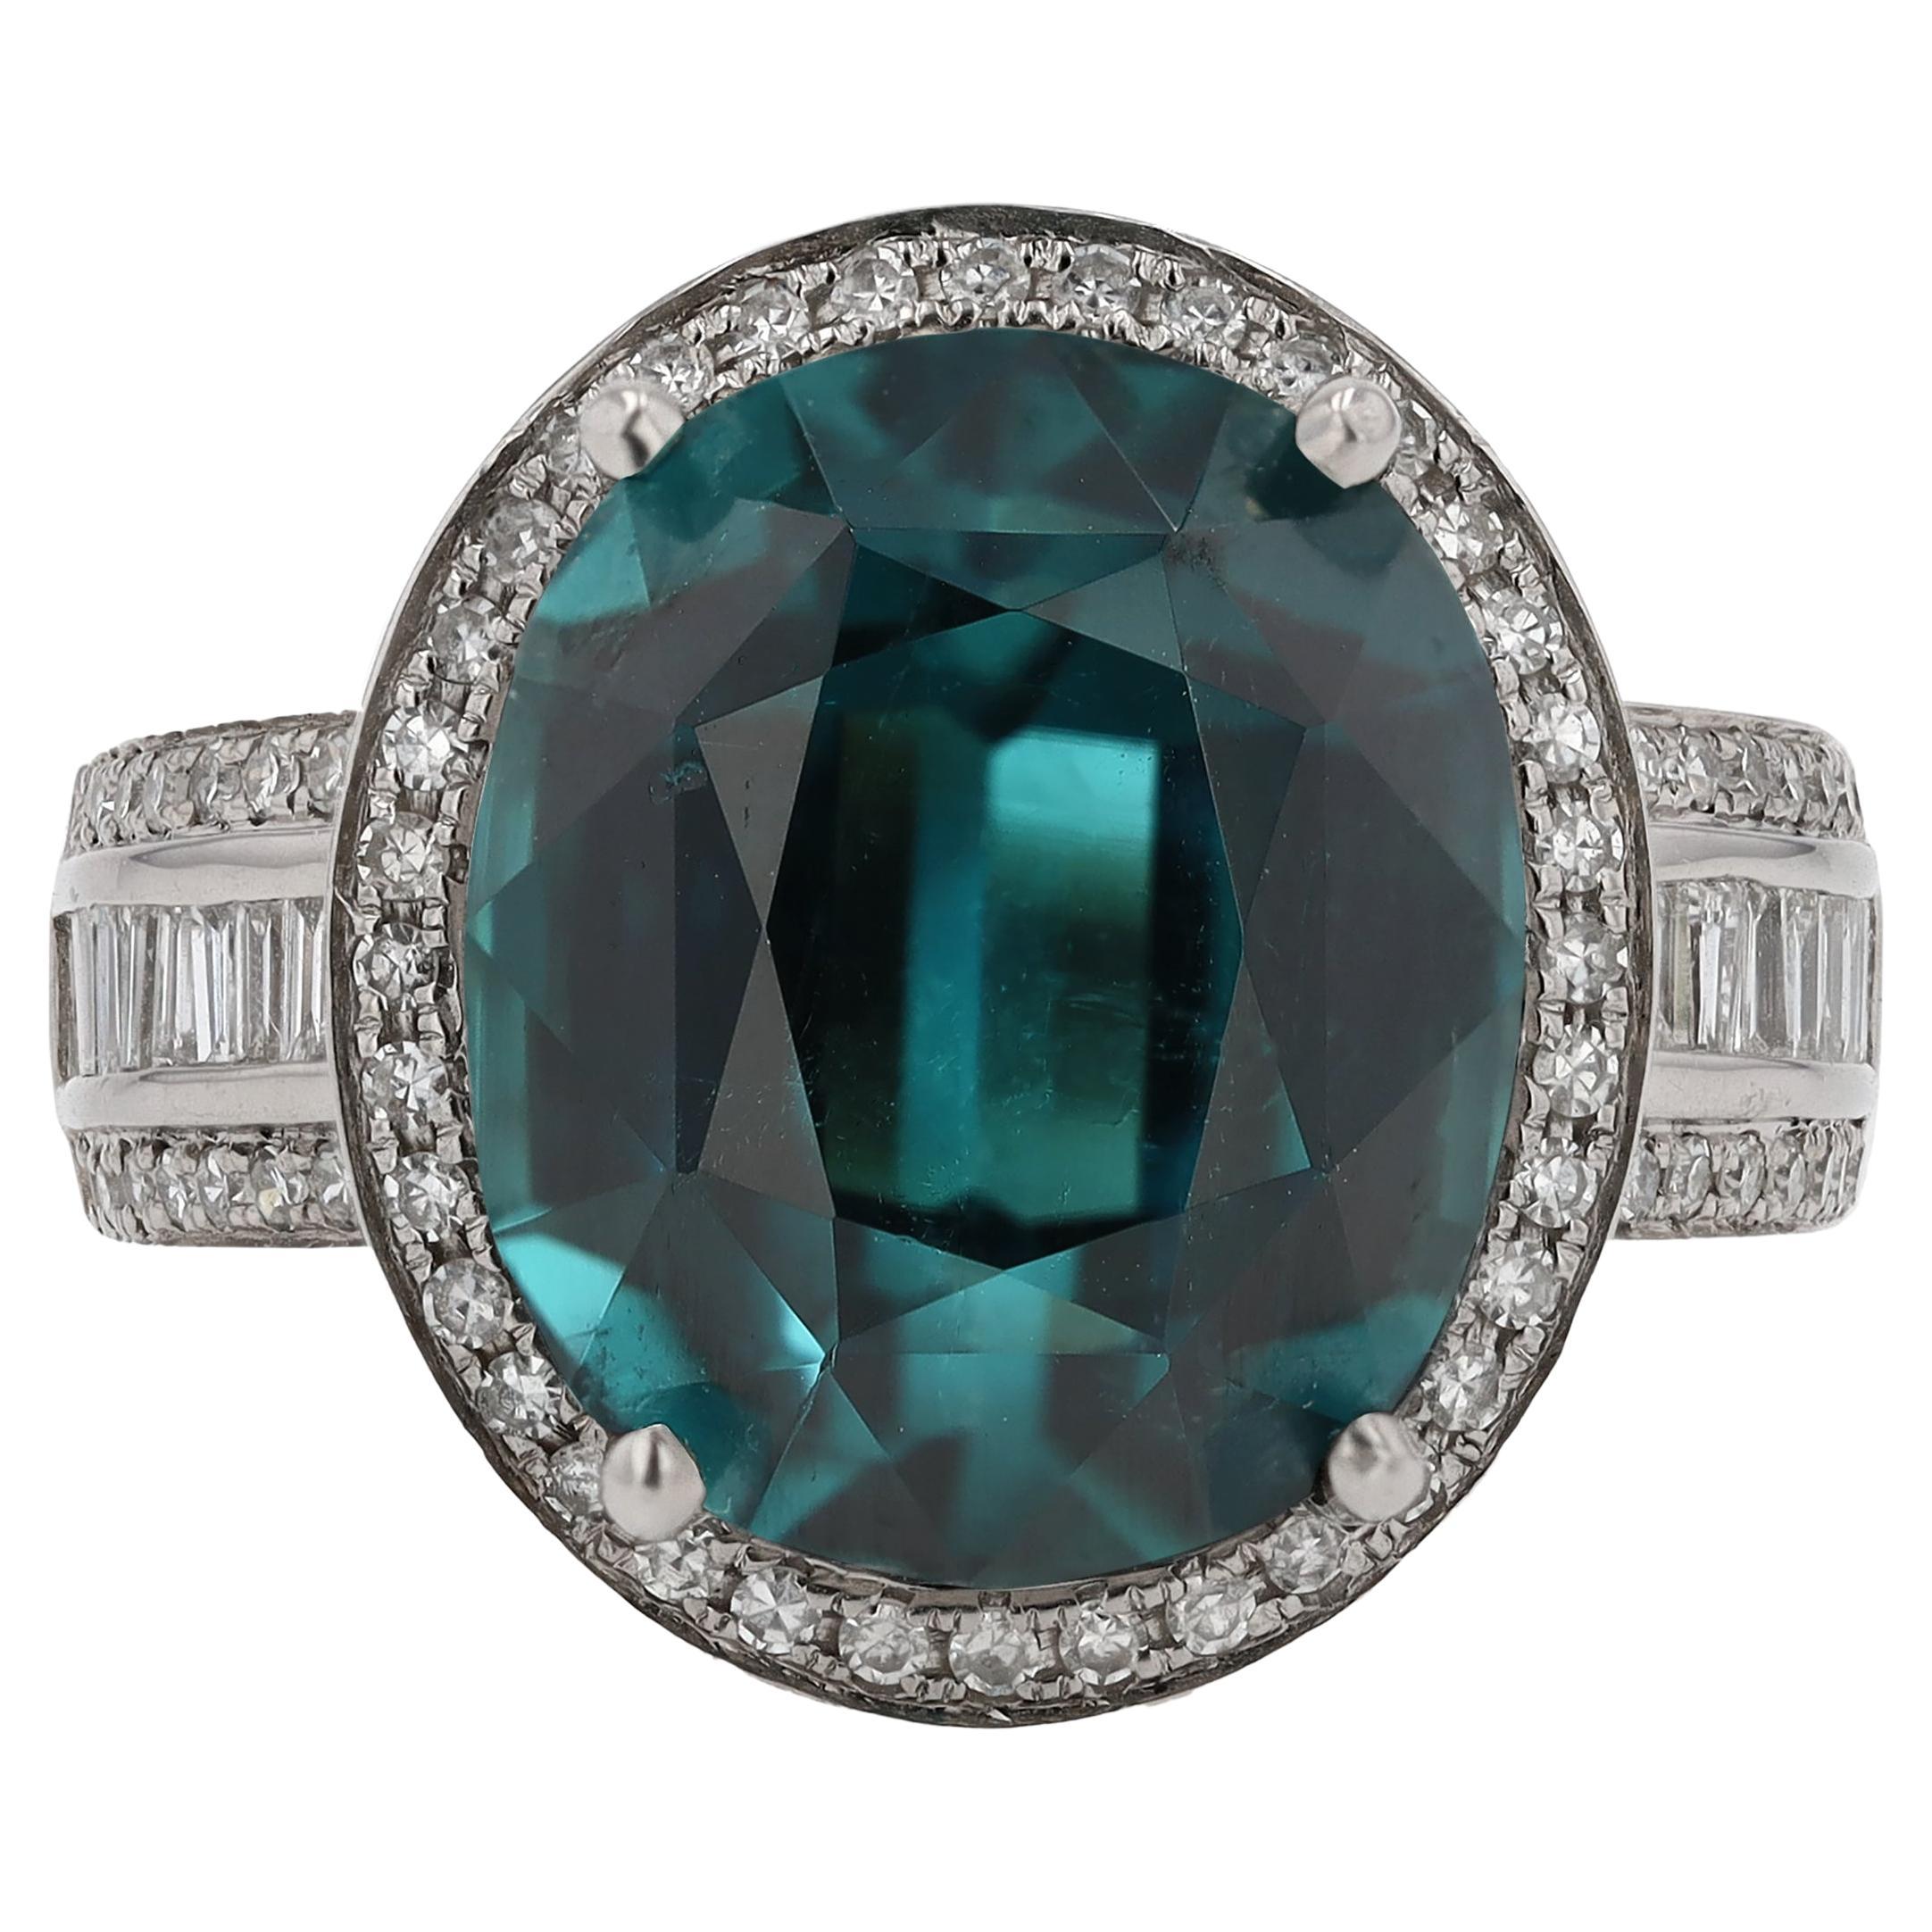  Vintage 9.40 Carat Indicolite Tourmaline and Diamond Cocktail Ring For Sale